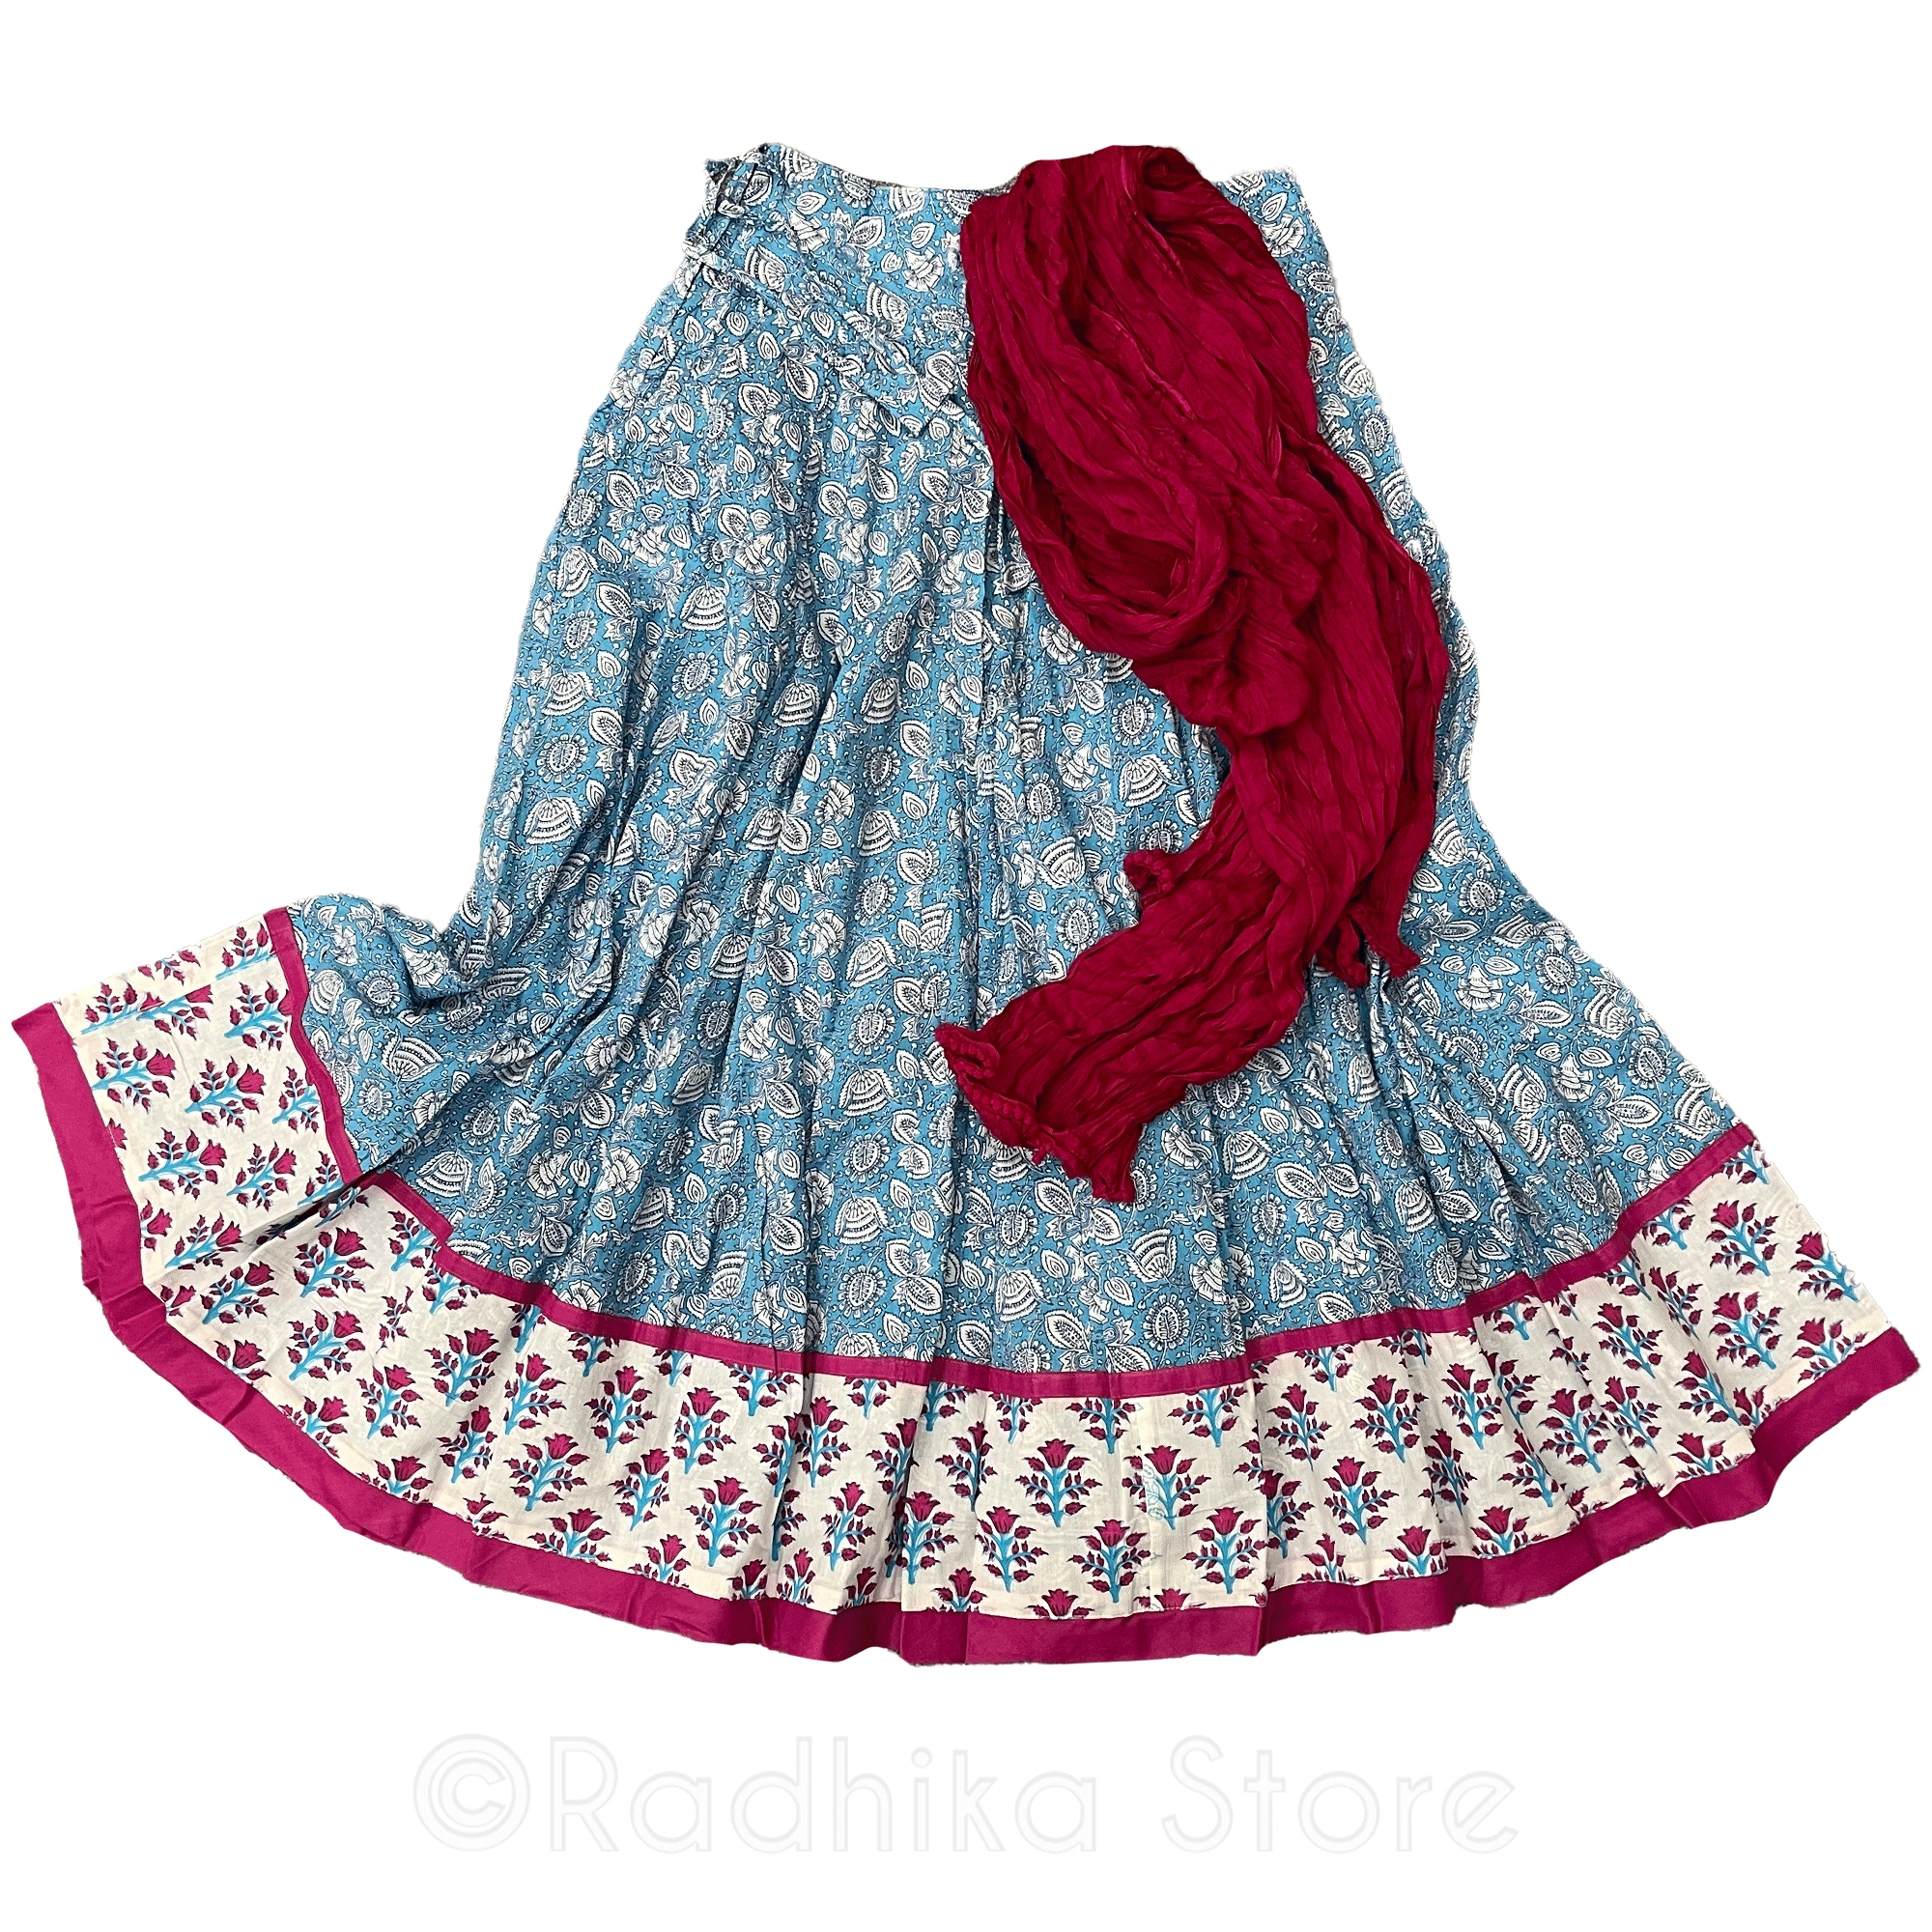 Yamuna -  Gopi Skirt -Teal Blue and Cranberry- Cotton Screen Print - With Chadar - S-M-L